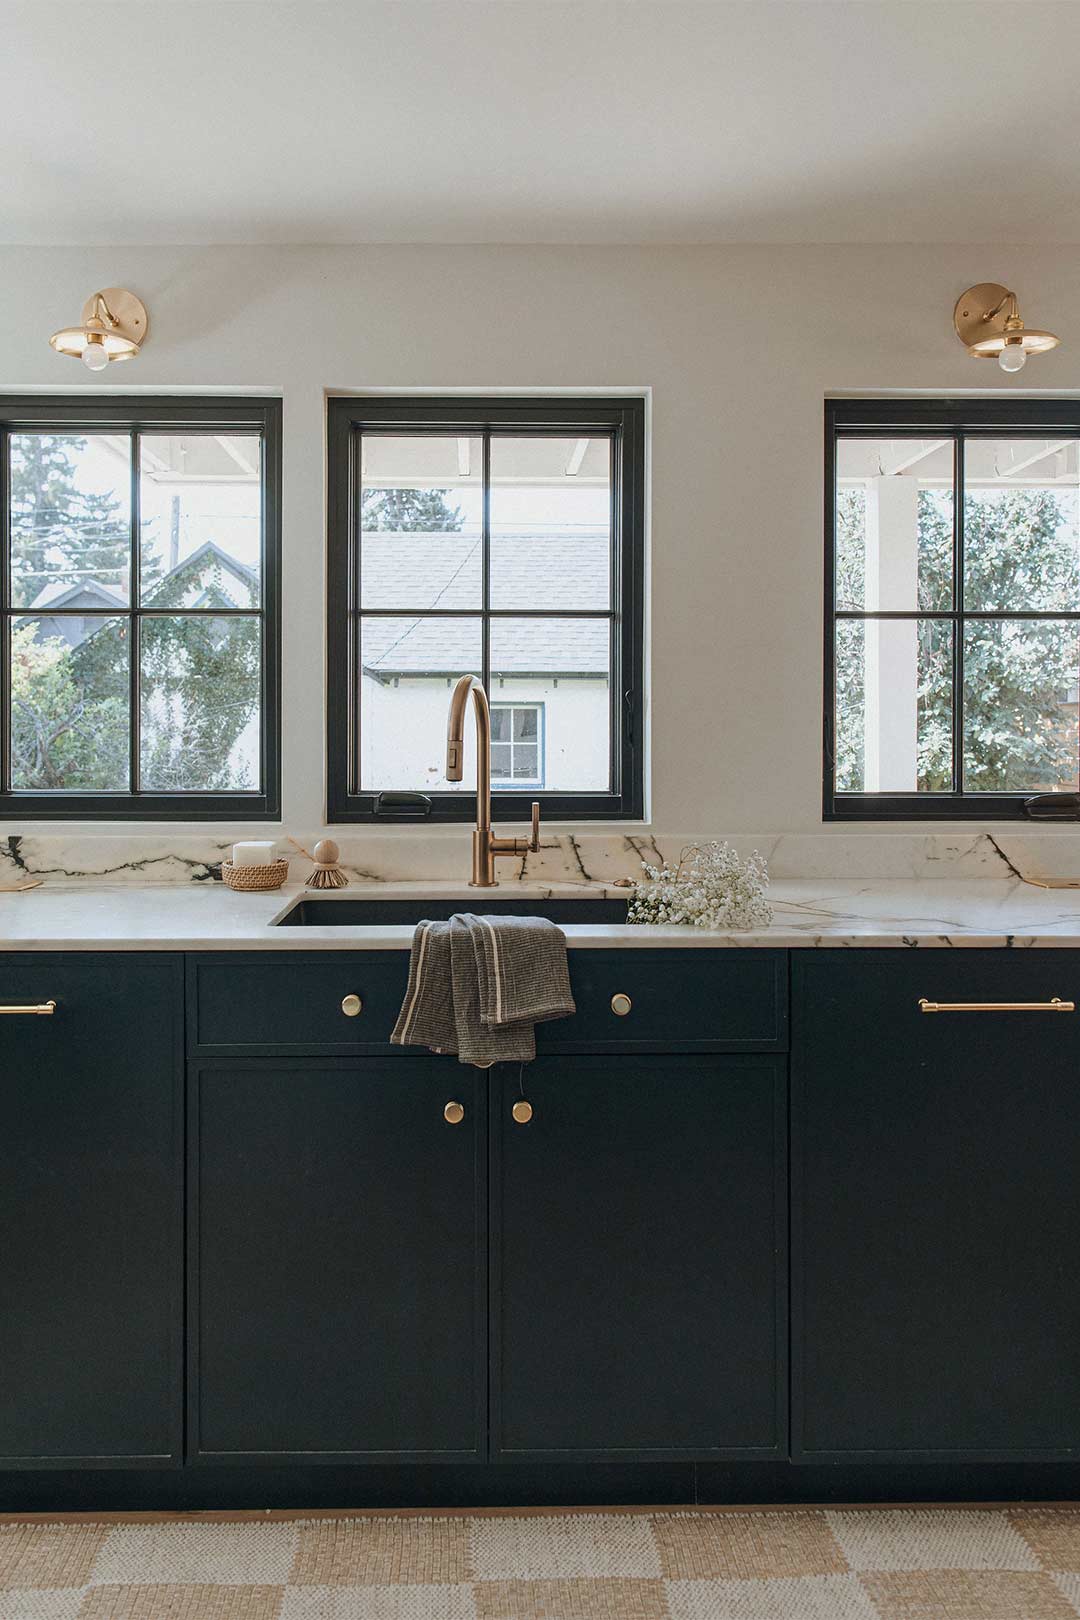 Traditional design kitchen sink with dark blue cabinets, brass knobs, brass faucet and brass light fixtues